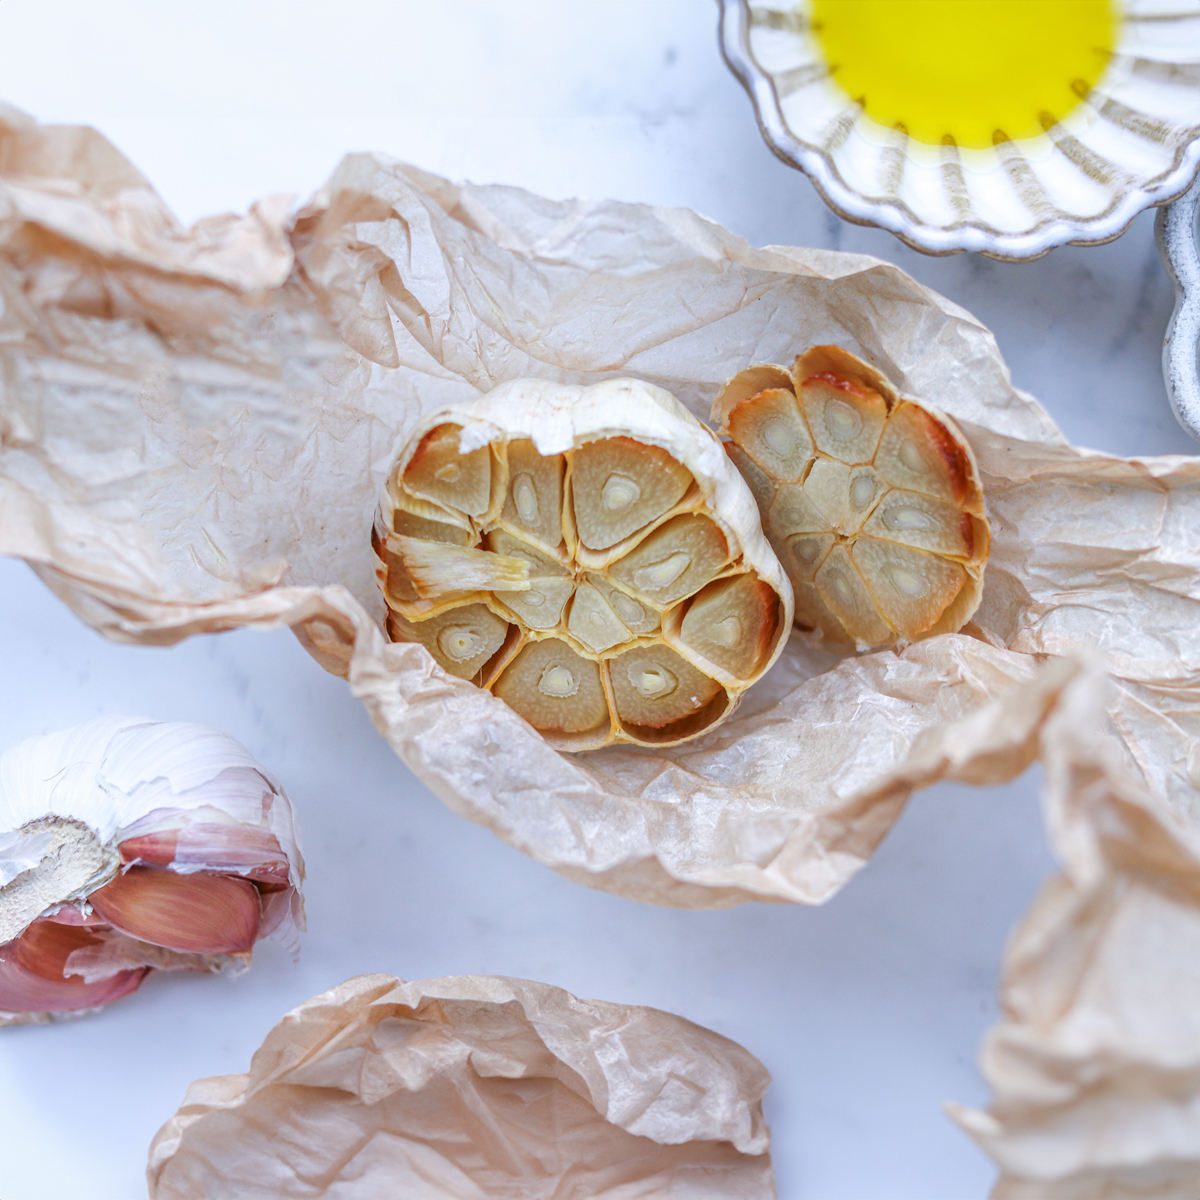 Roasted garlic in the parchment paper on white background